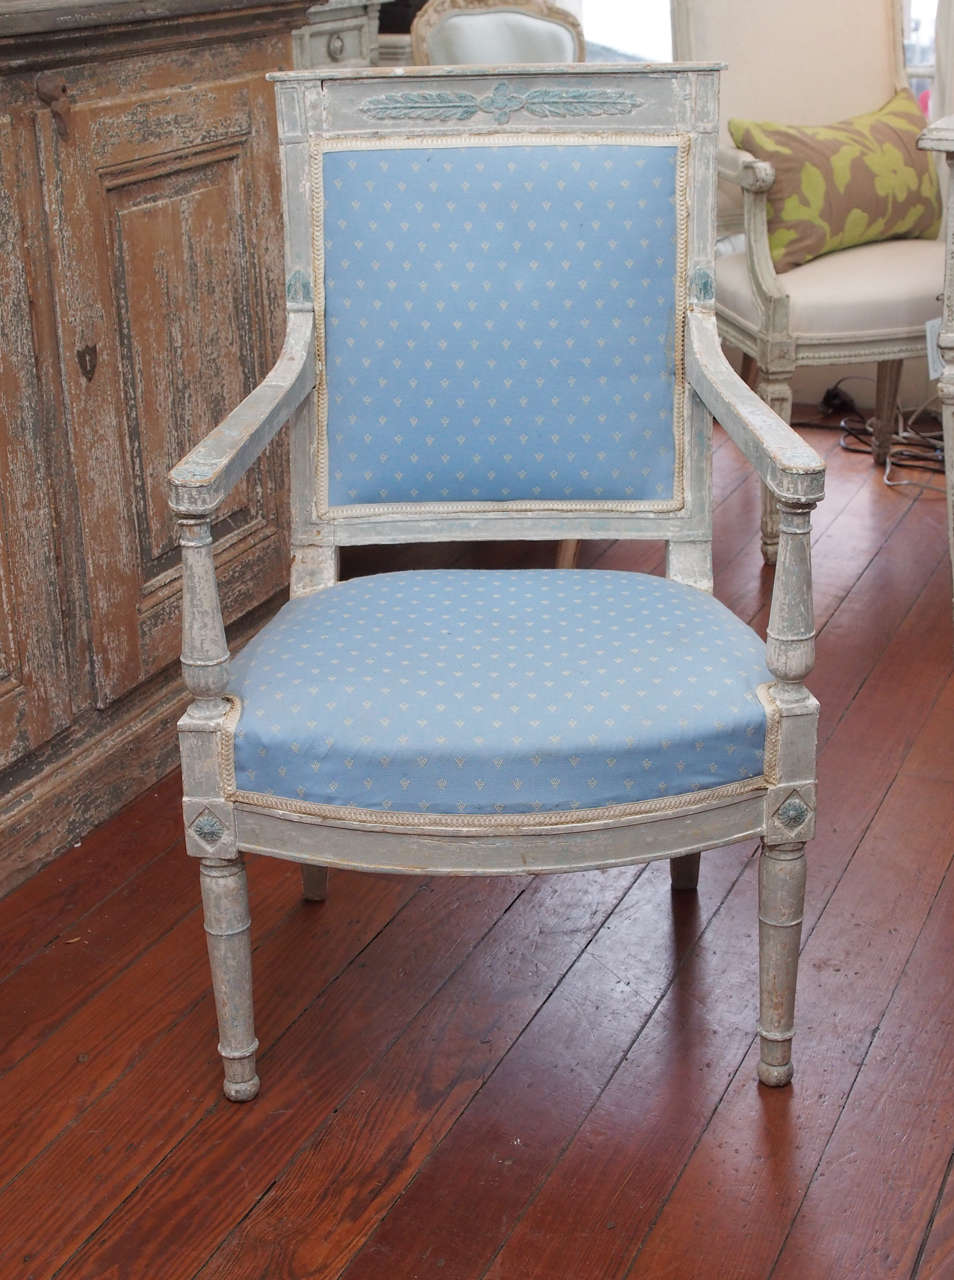 Pair of painted directoire fauteuils in pale gray and blue. Flower and leaf center medallion motif. Original paint. Circa 1795
Needs new upholstery